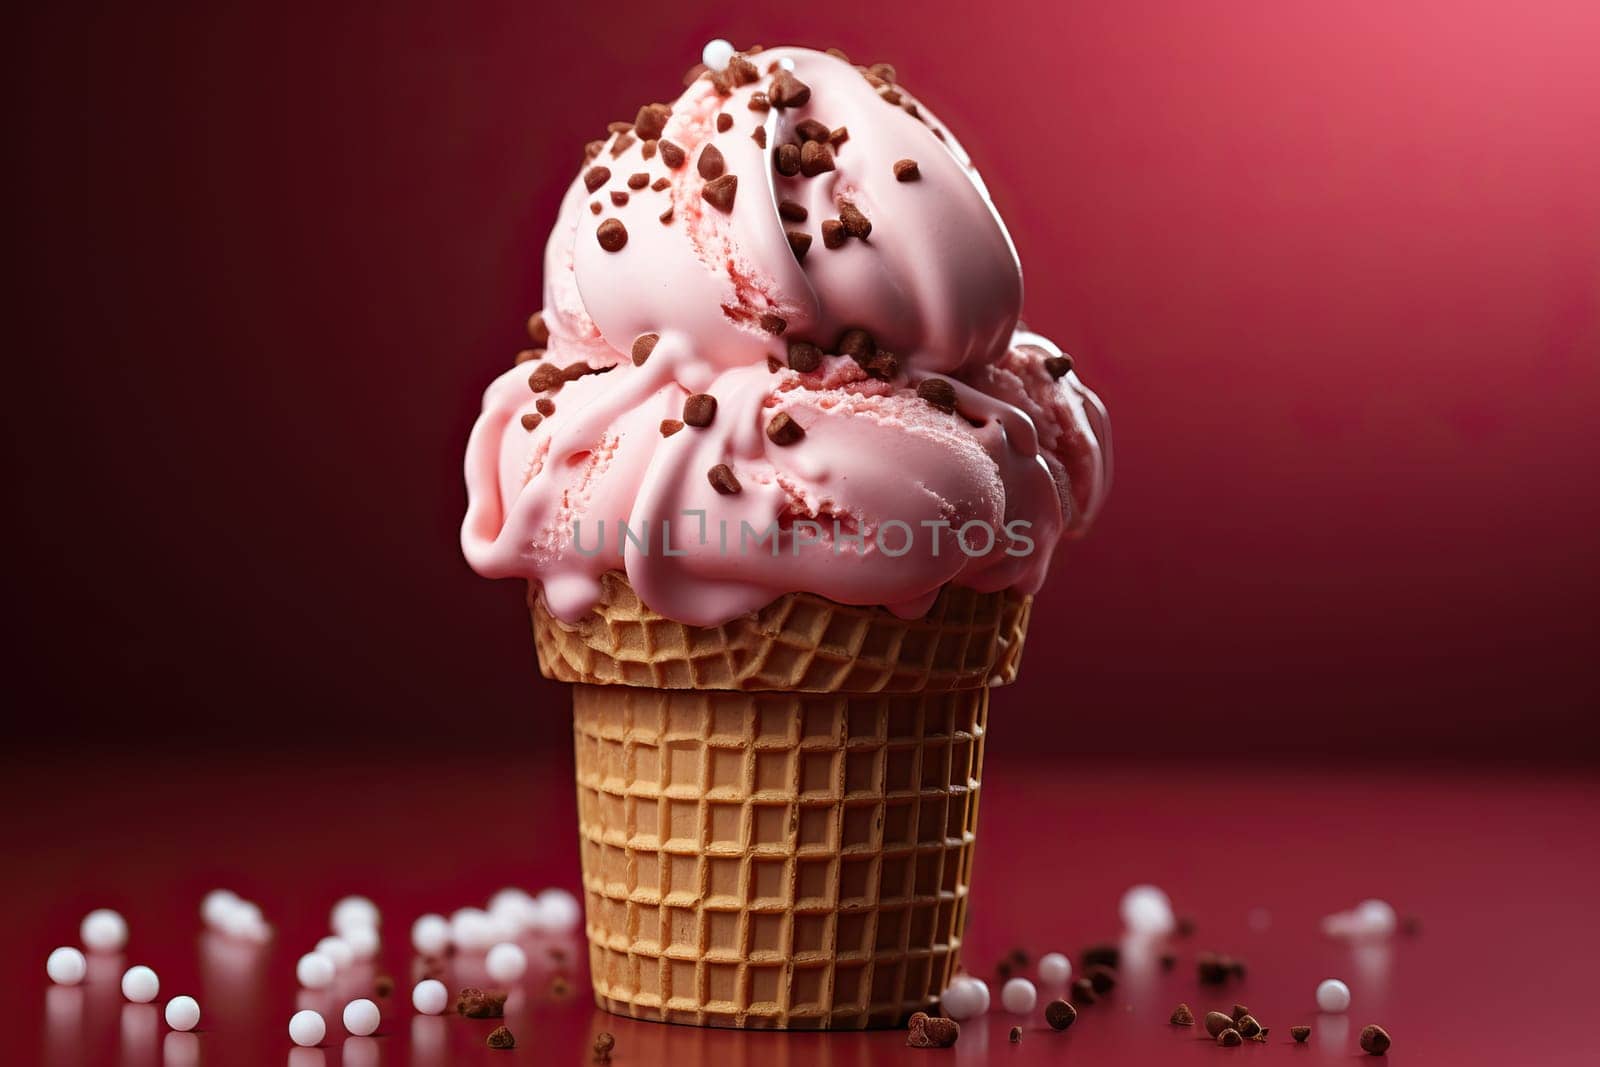 Waffle glass with chocolate balls of ice cream on a red background.